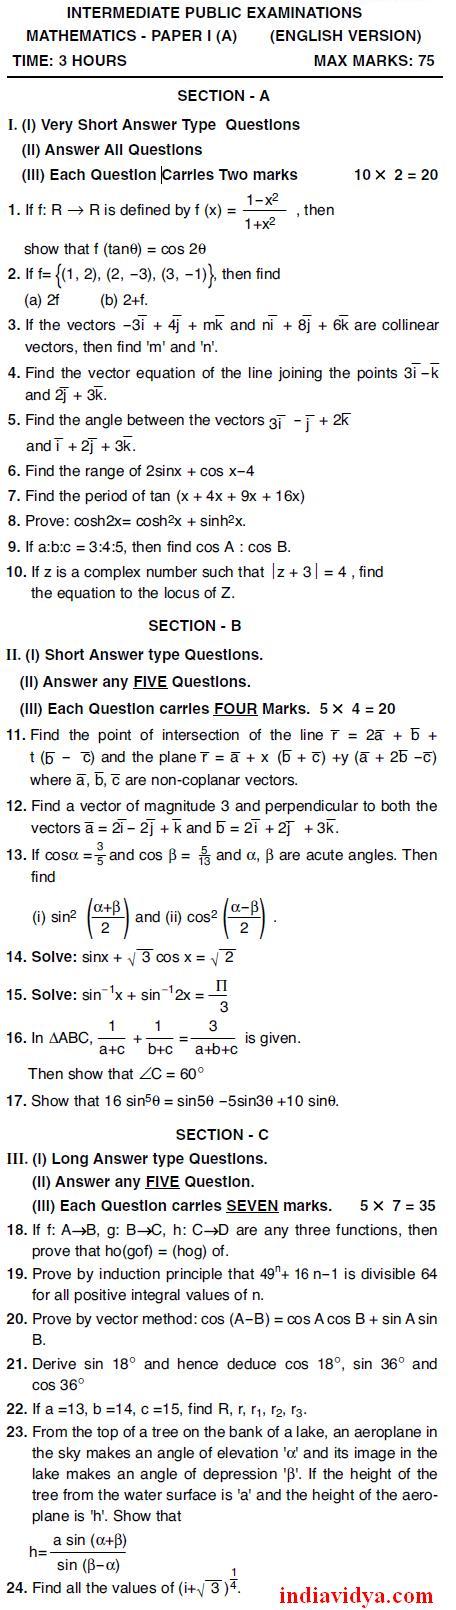 Ap inter 1st year model question papers 2017 